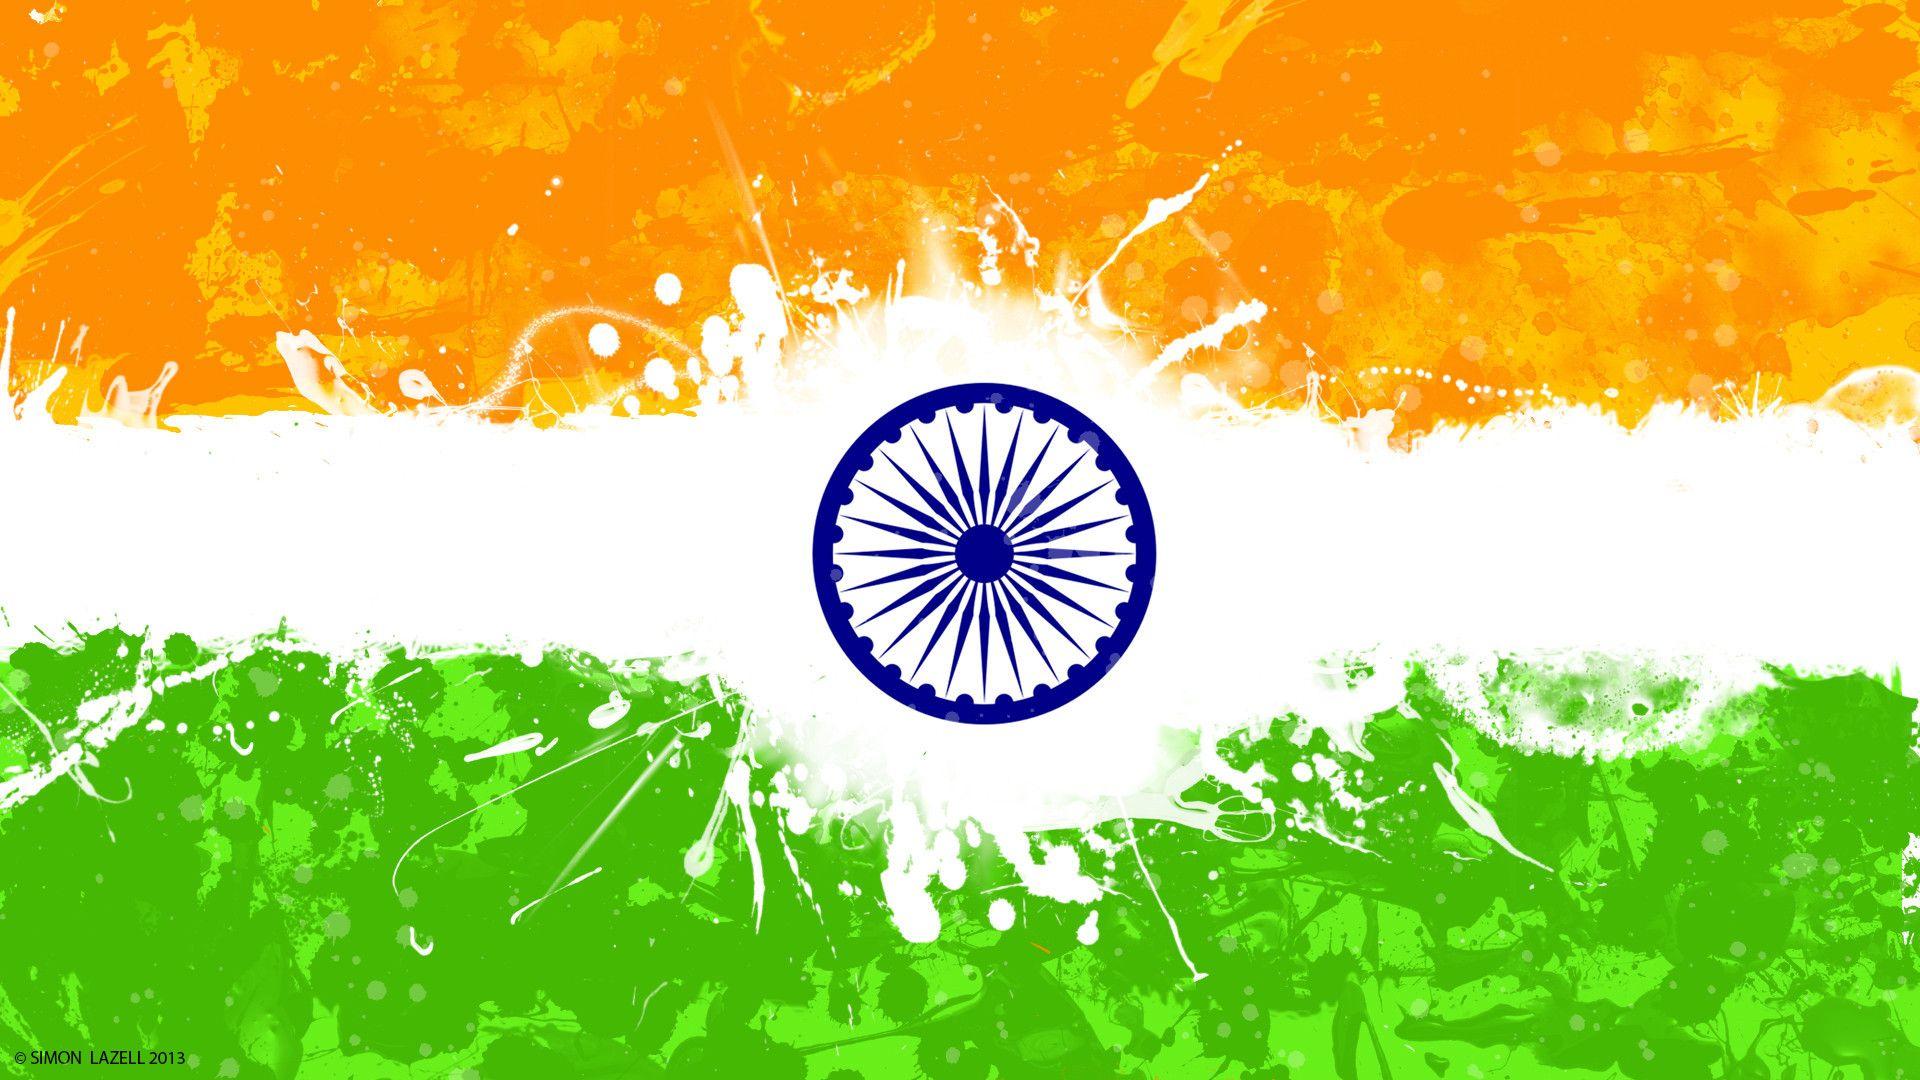 69th Republic Day 2018 Indian Flag Wallpaper HD Image Free